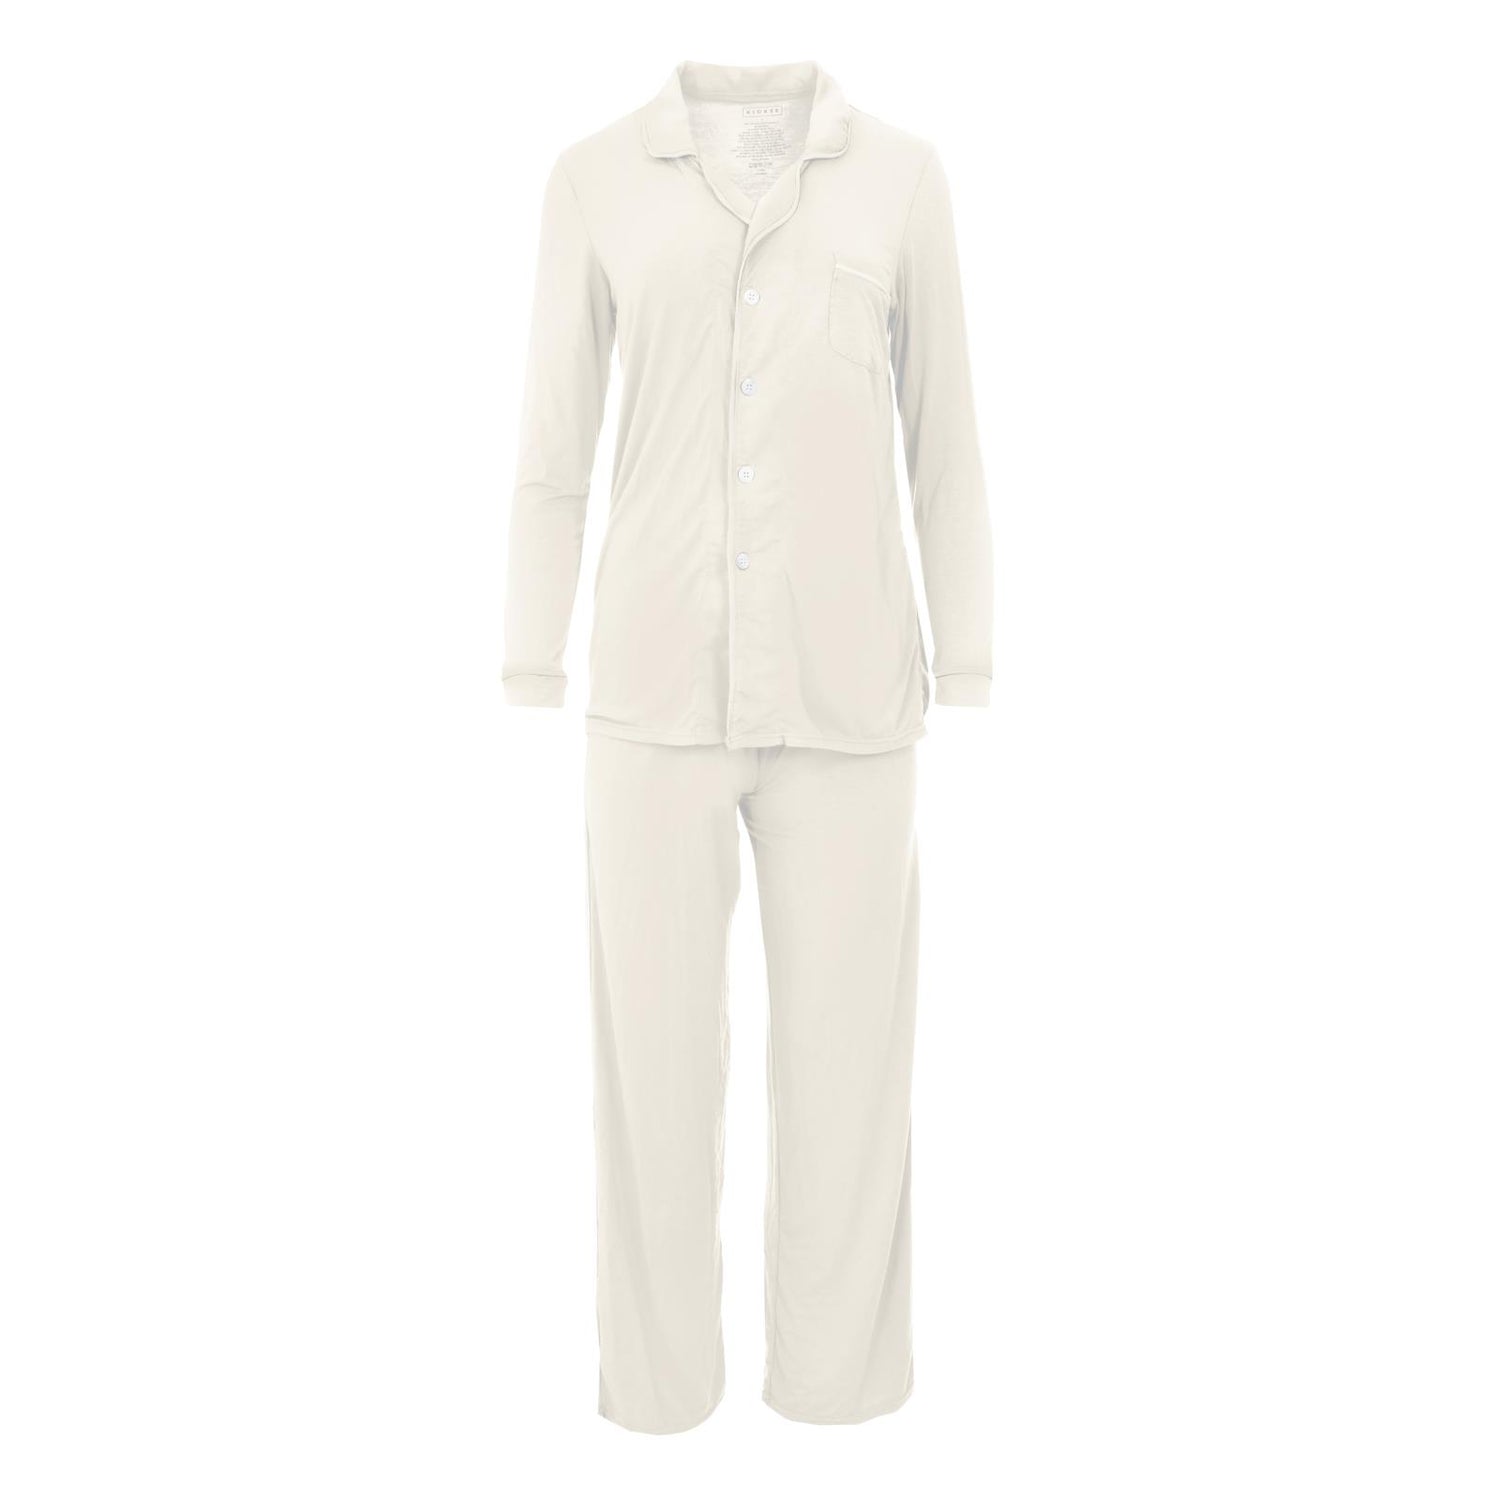 Women's Long Sleeved Collared Pajama Set in Natural